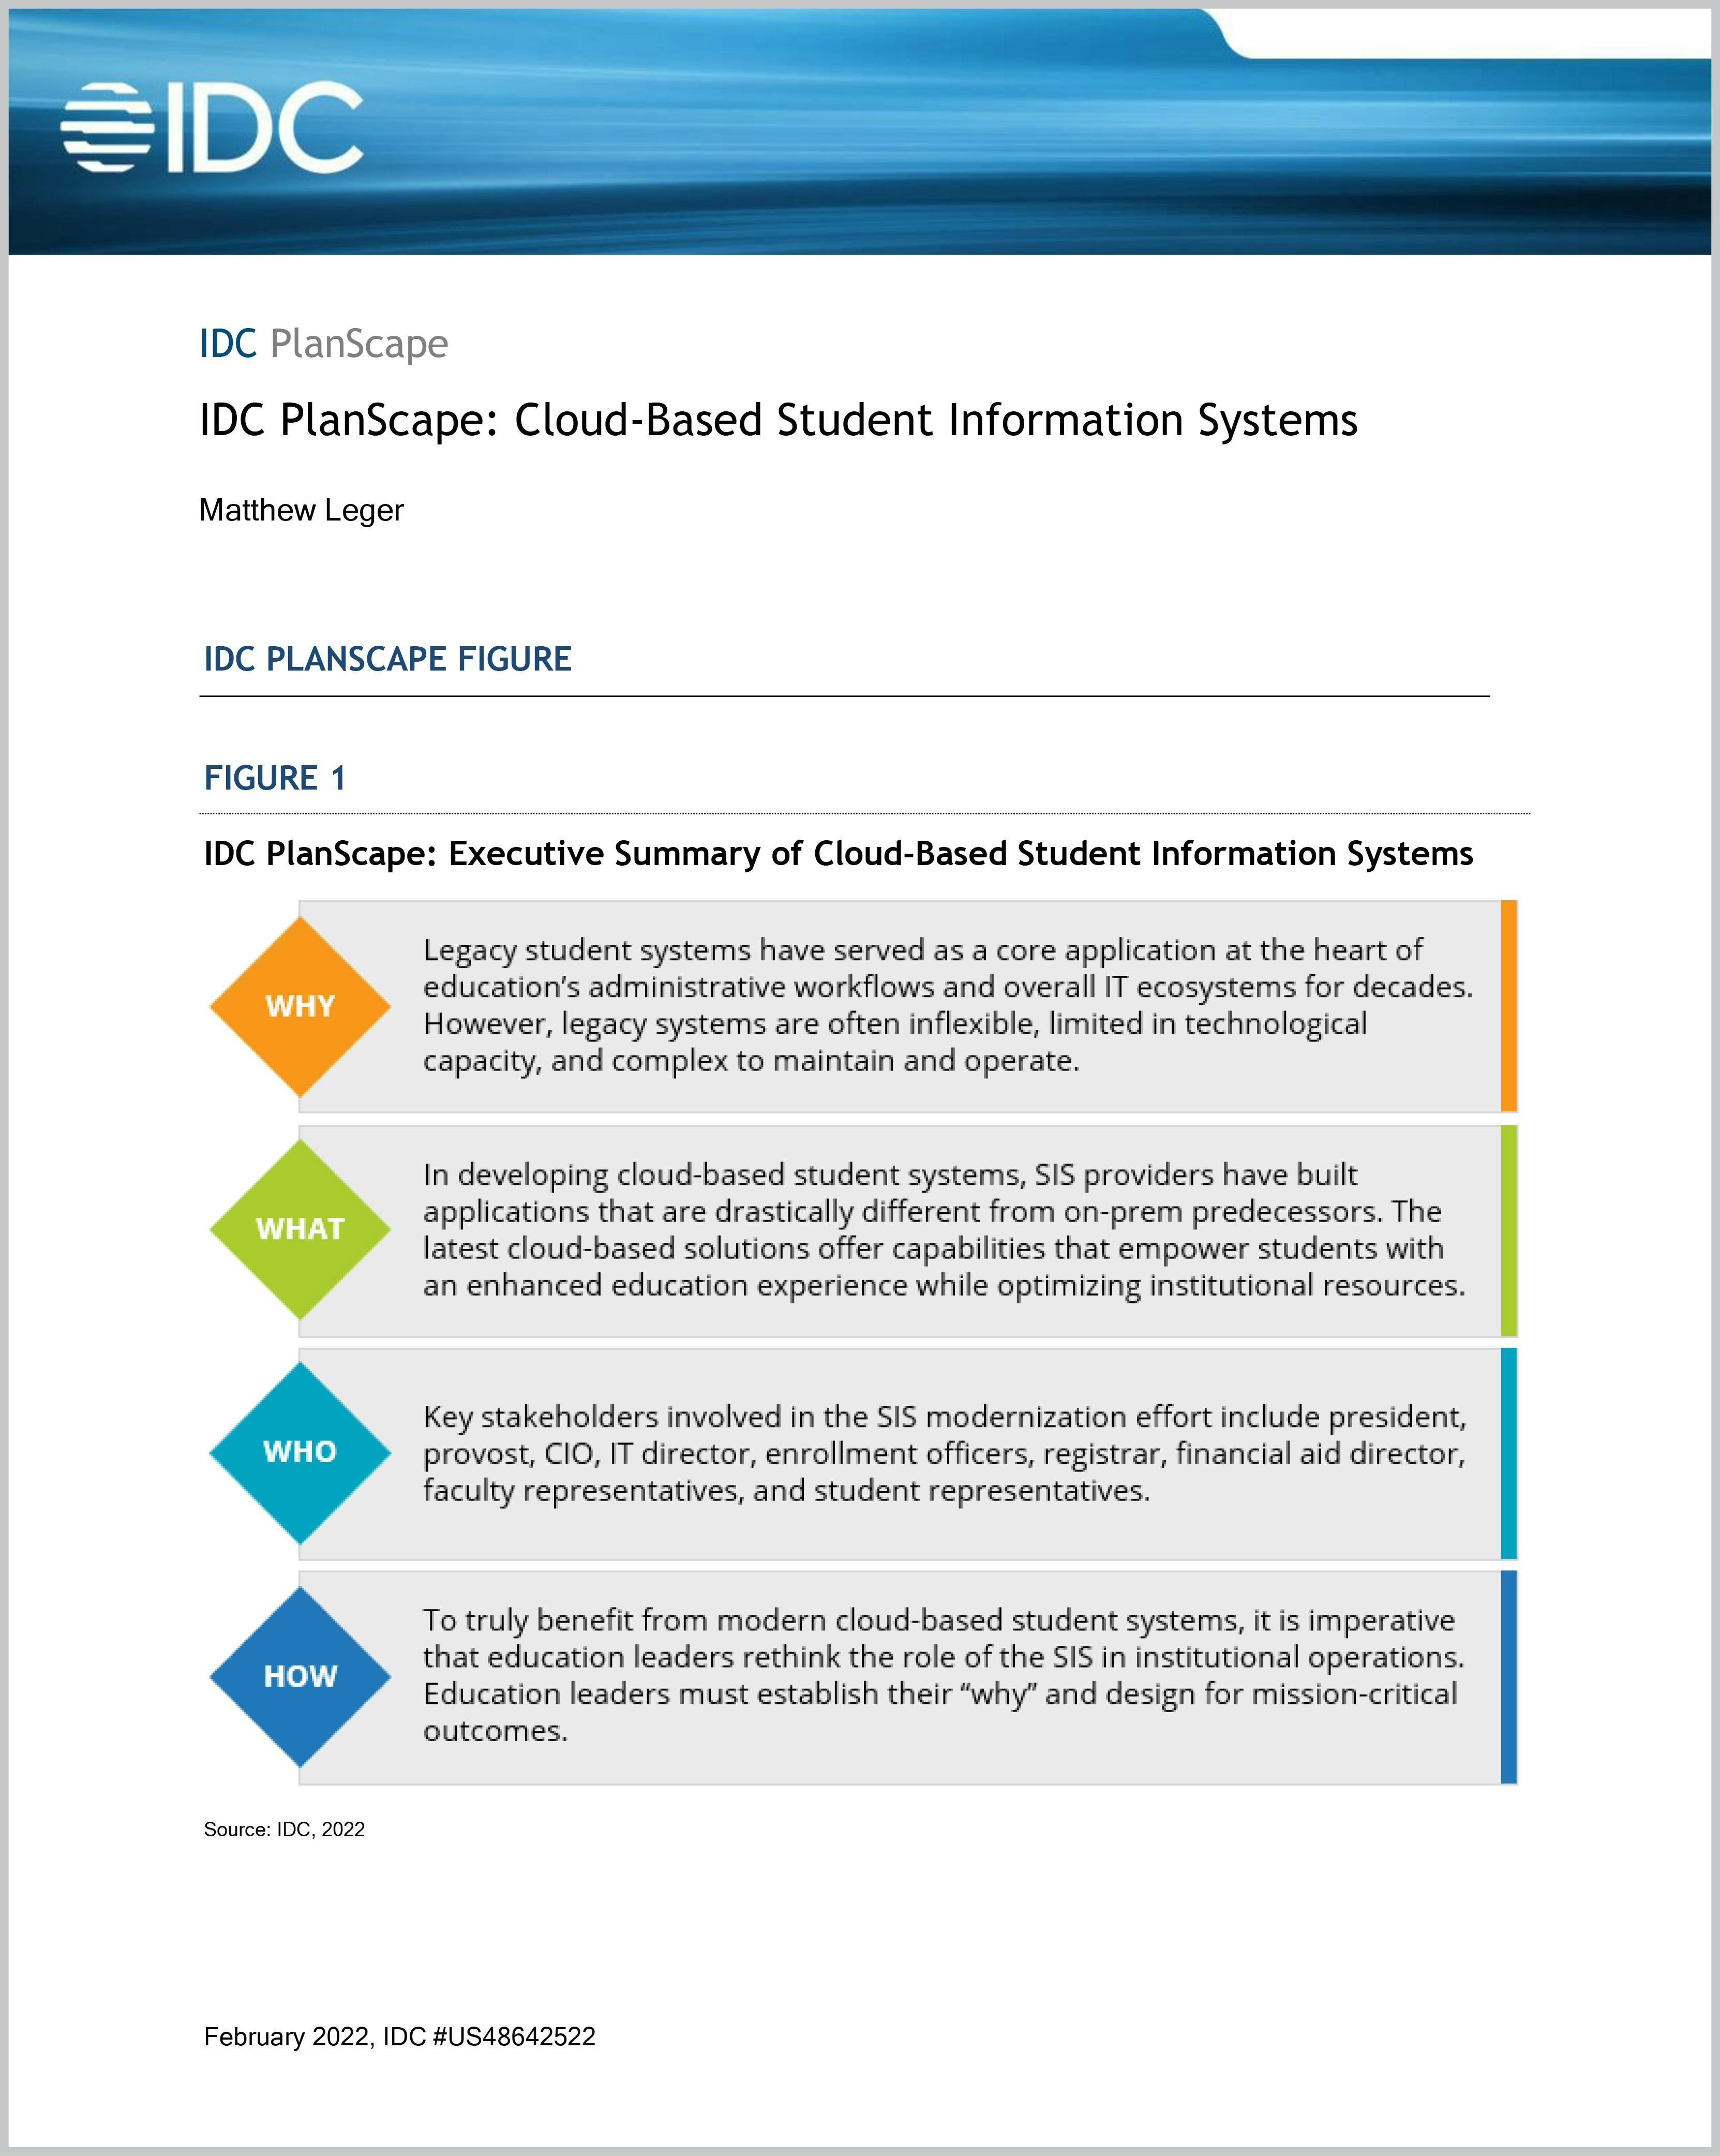 IDC PlanScape: Cloud-Based Student Information Systems
